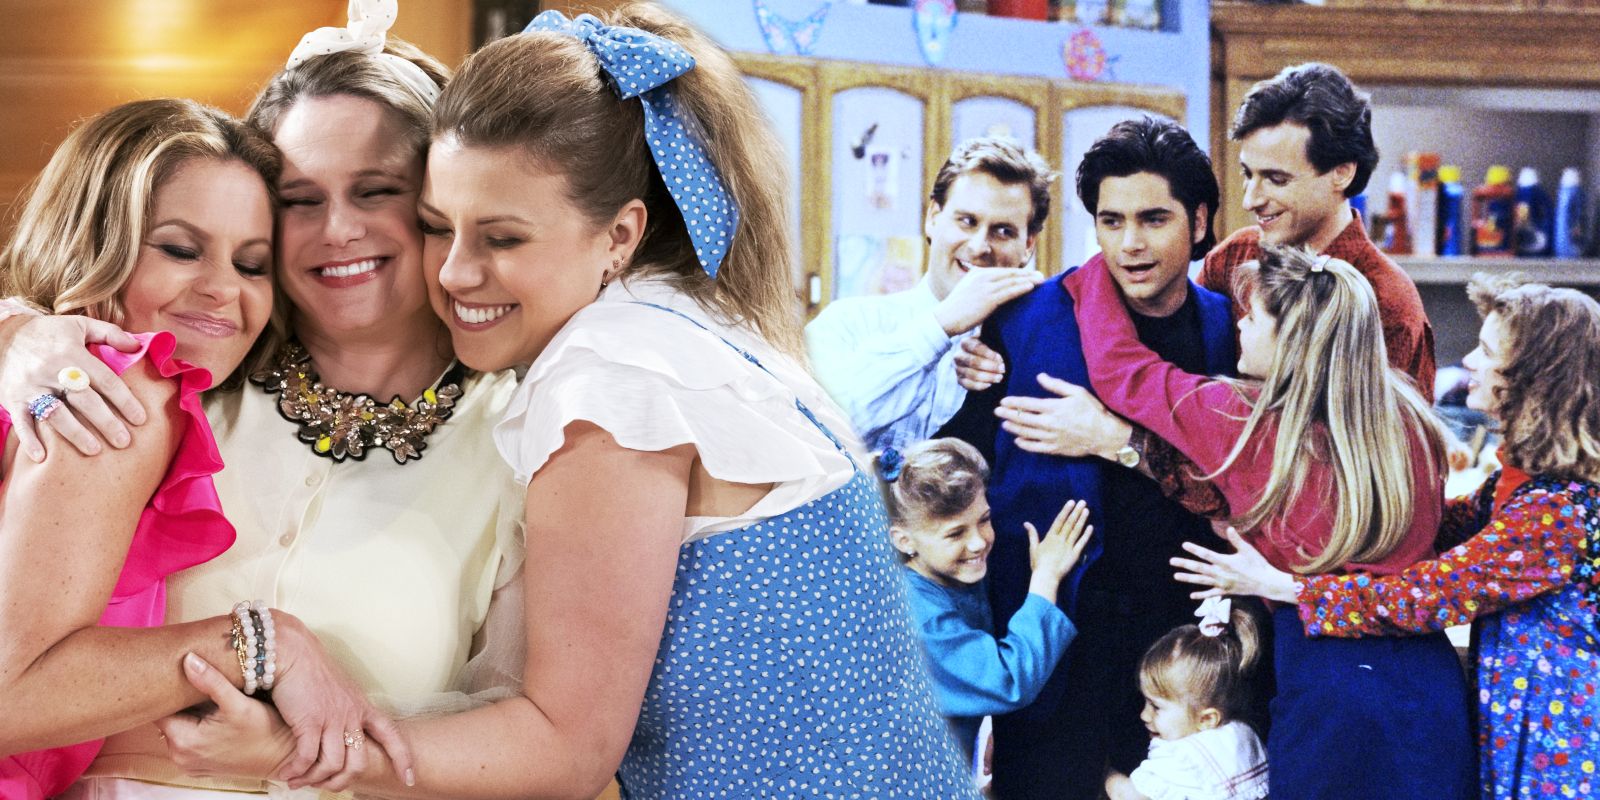 Why Fuller House’s Ending Didn’t Work (Compared To Full House)